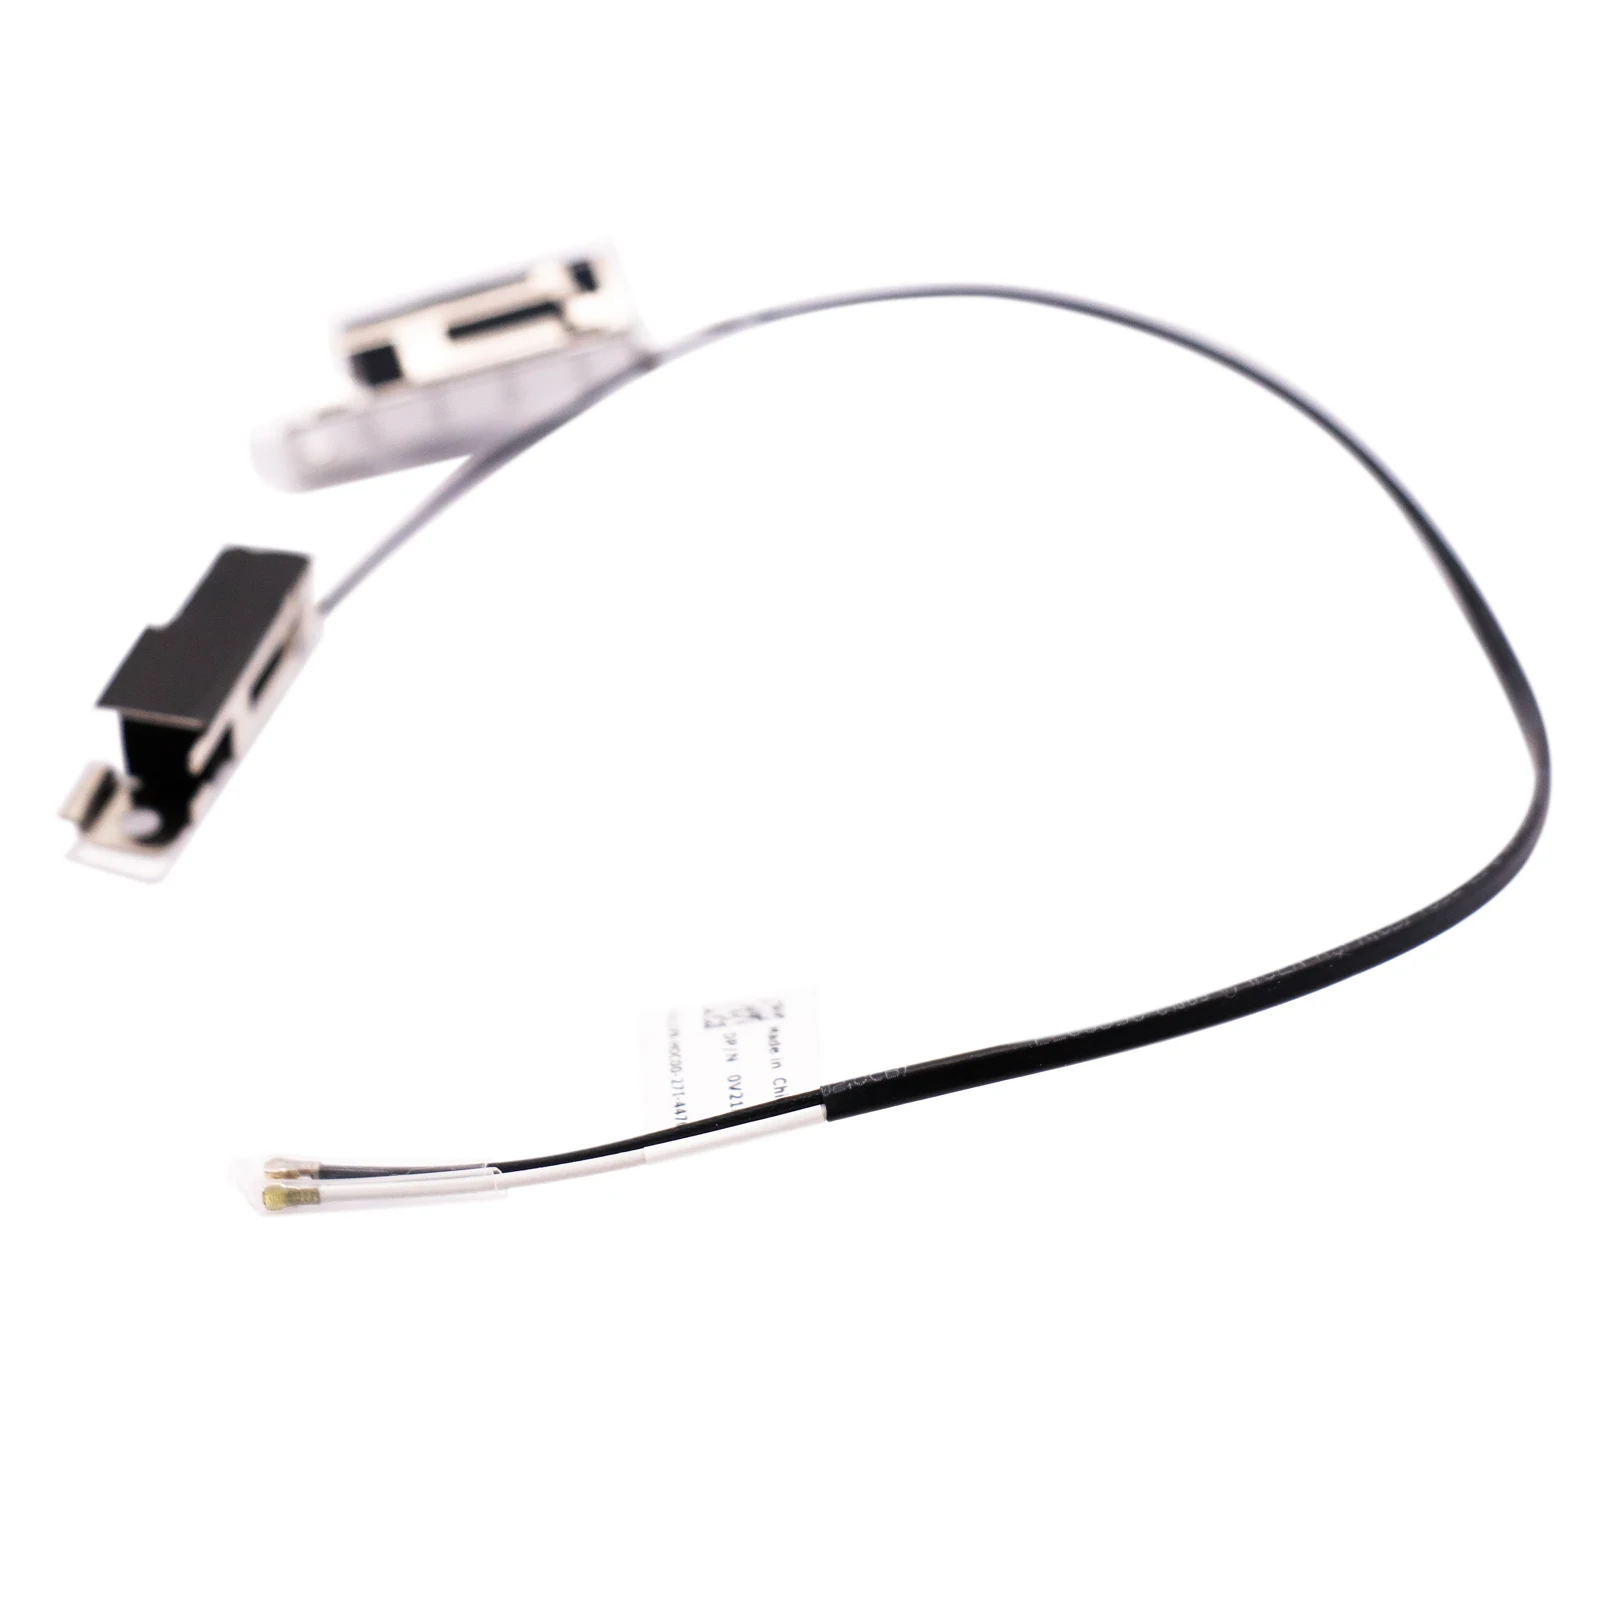 Wireless Antenna KIT for DELL Optiplex 7000 7000MT WIFI Cable XMV1F 0XMV1F